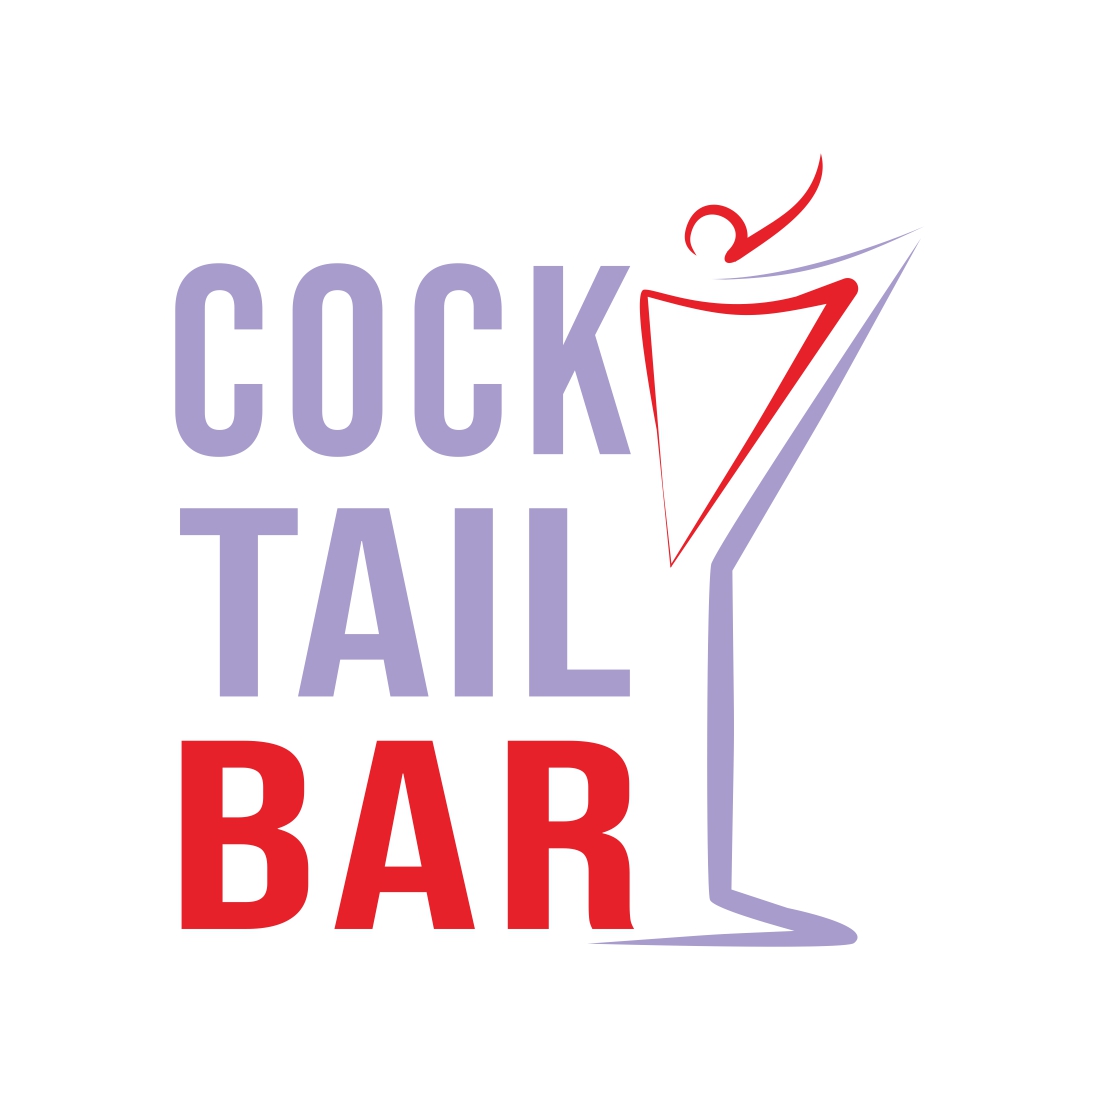 Drink served in bars and restaurants around the world >> ONLY 11$ preview image.